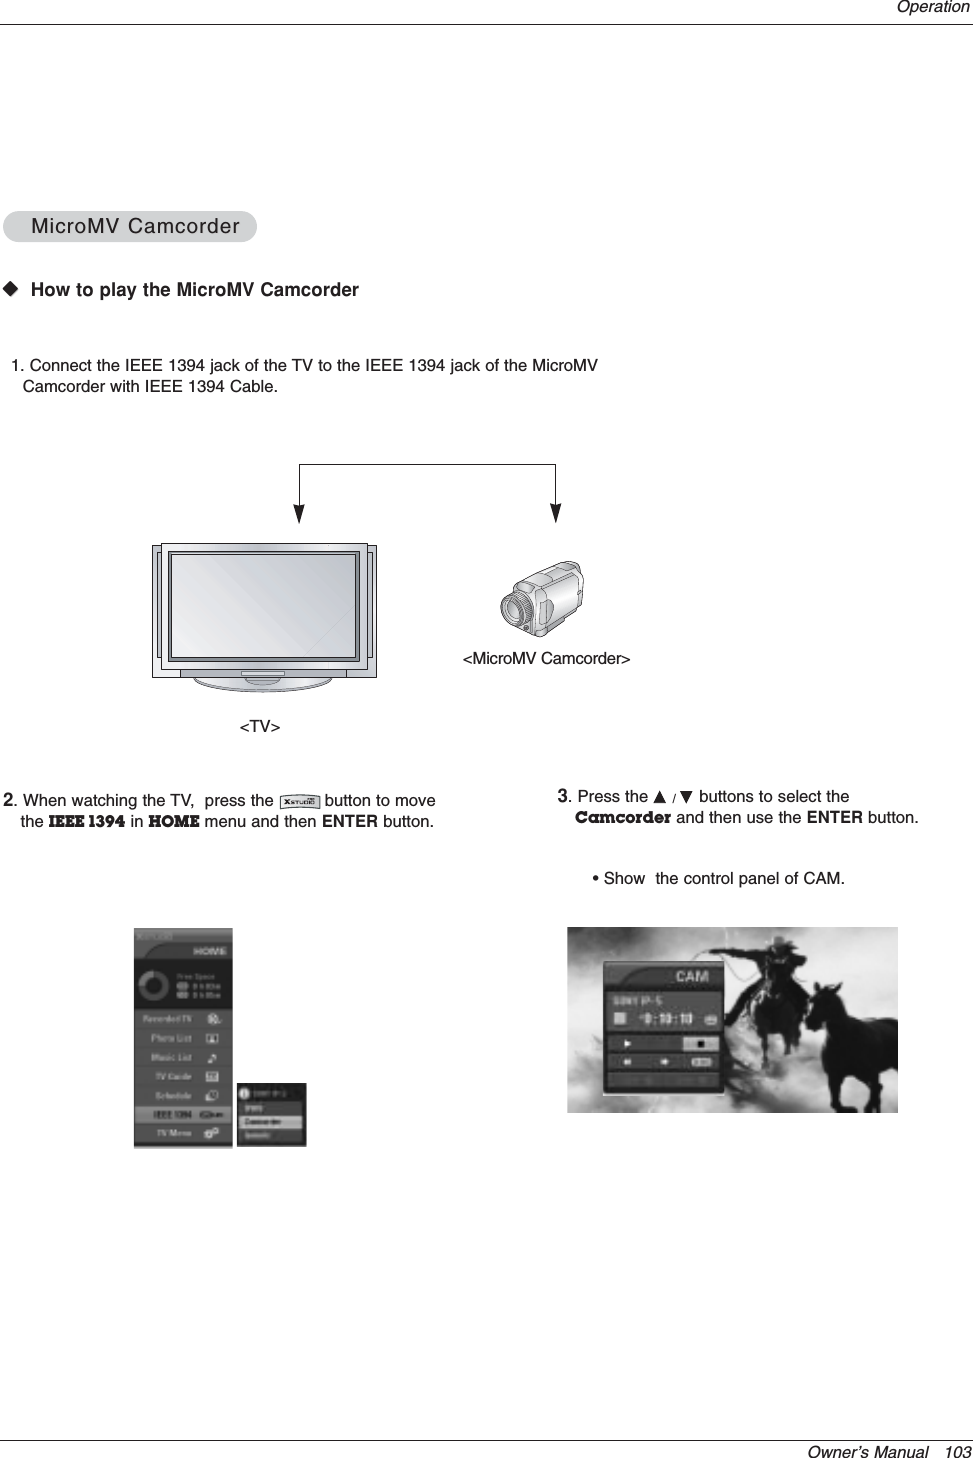 Owner’s Manual   103OperationWWVHow to play the MicroMV CamcorderMicroMV CamcorderMicroMV Camcorder&lt;TV&gt;&lt;MicroMV Camcorder&gt;1. Connect the IEEE 1394 jack of the TV to the IEEE 1394 jack of the MicroMVCamcorder with IEEE 1394 Cable.2. When watching the TV,  press the          button to movethe IEEE 1394 in HOME menu and then ENTER button.3. Press the D/Ebuttons to select theCamcorder and then use the ENTER button.• Show  the control panel of CAM.